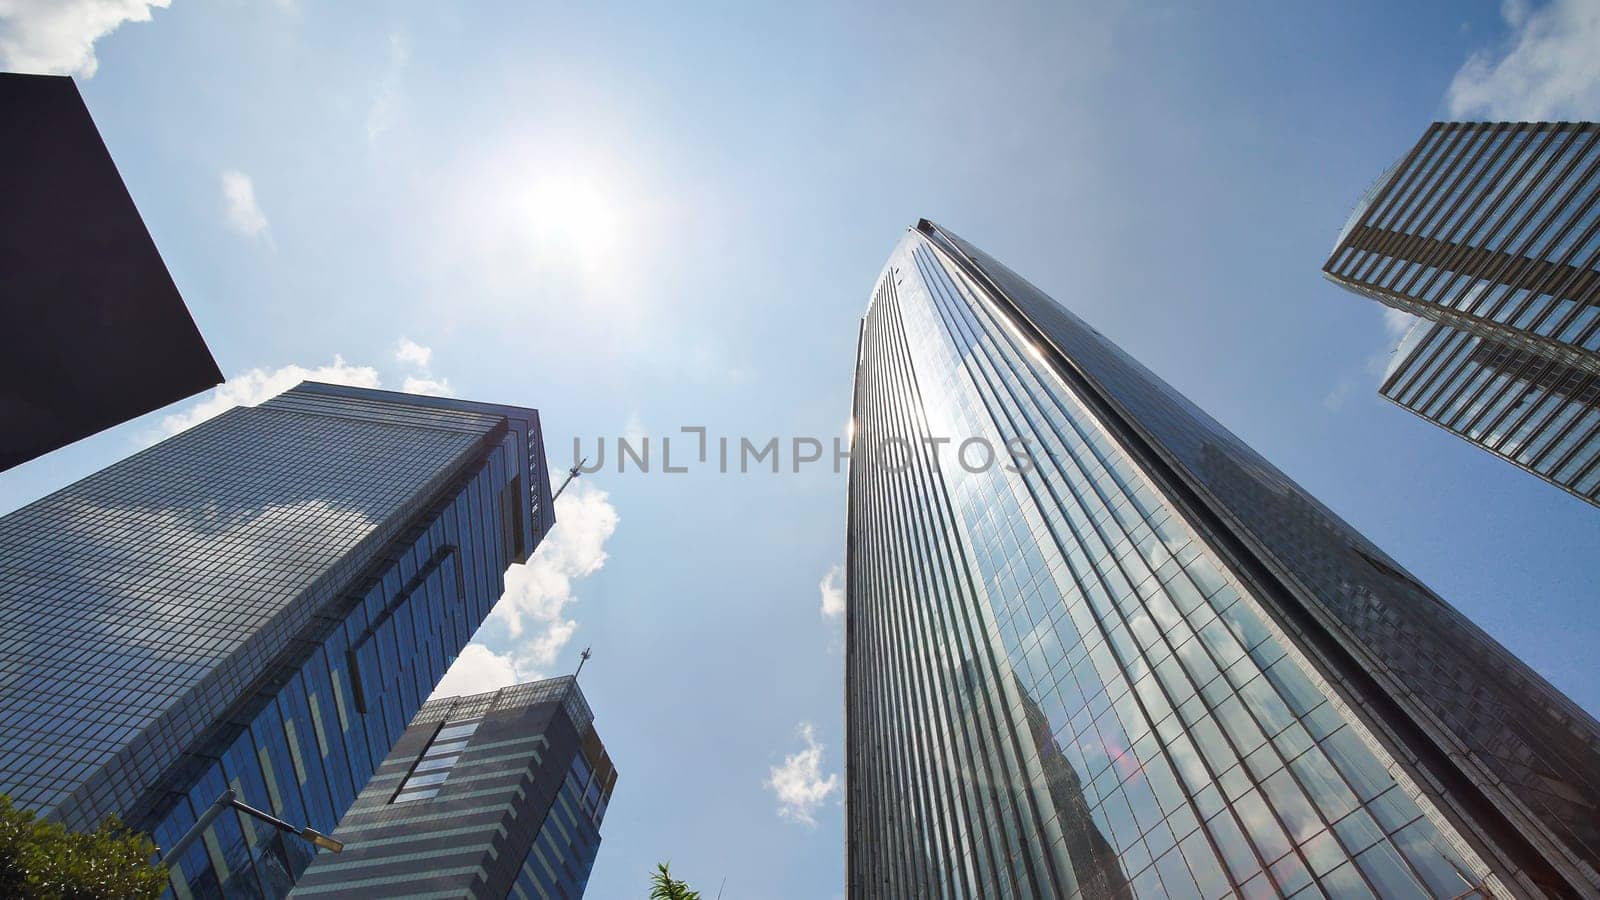 The streets of the skyscrapers of Jakarta, the capital of Indonesia